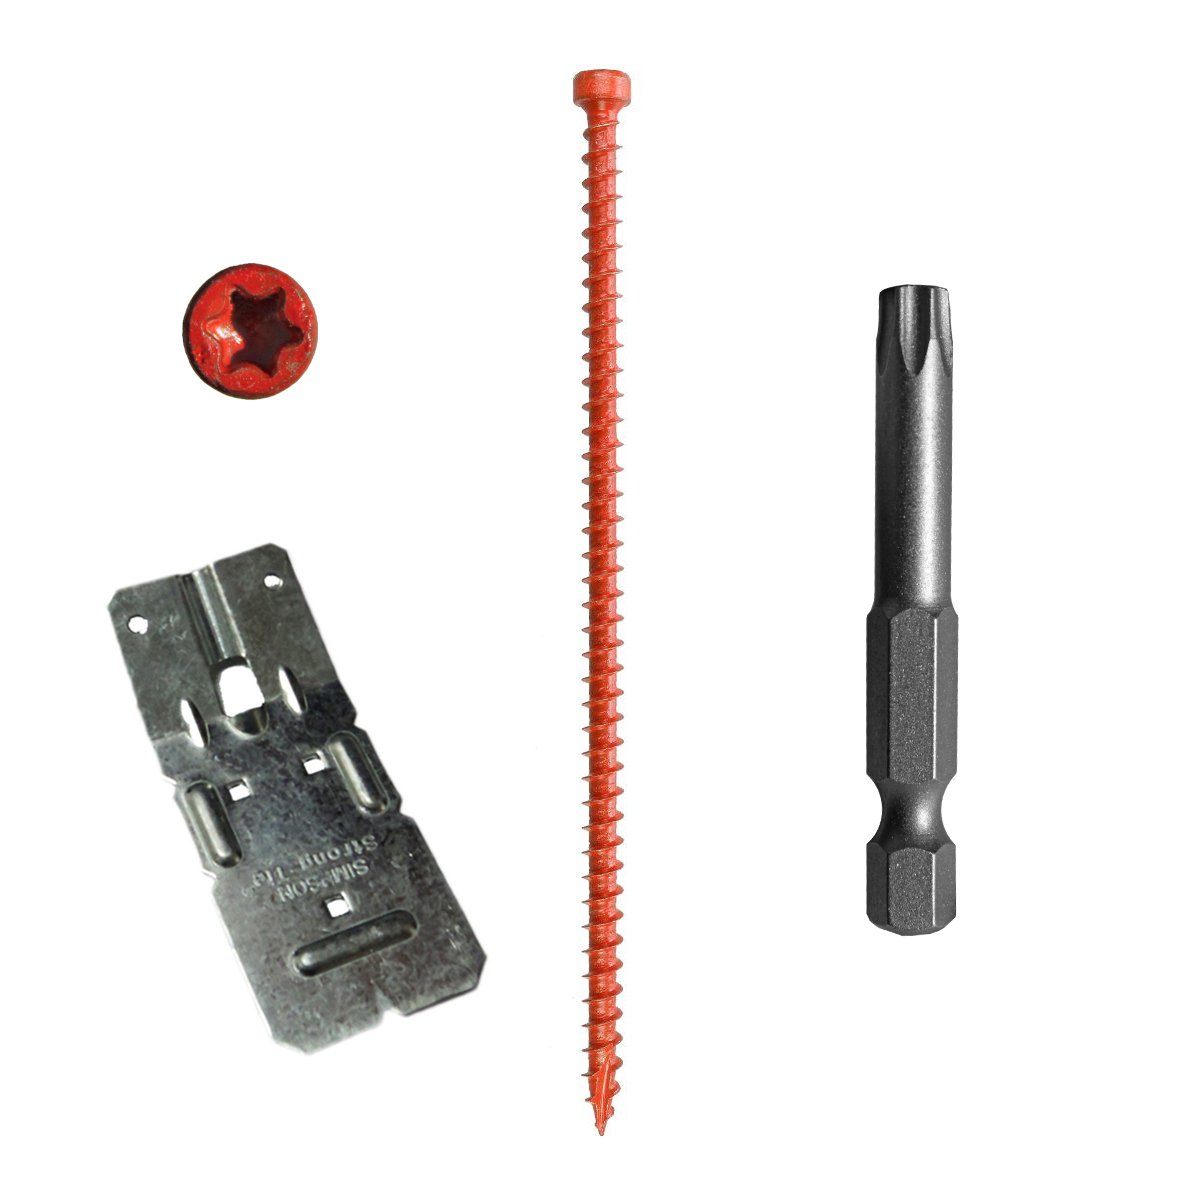 Strong-Drive Sdwc Truss Screw (Red)